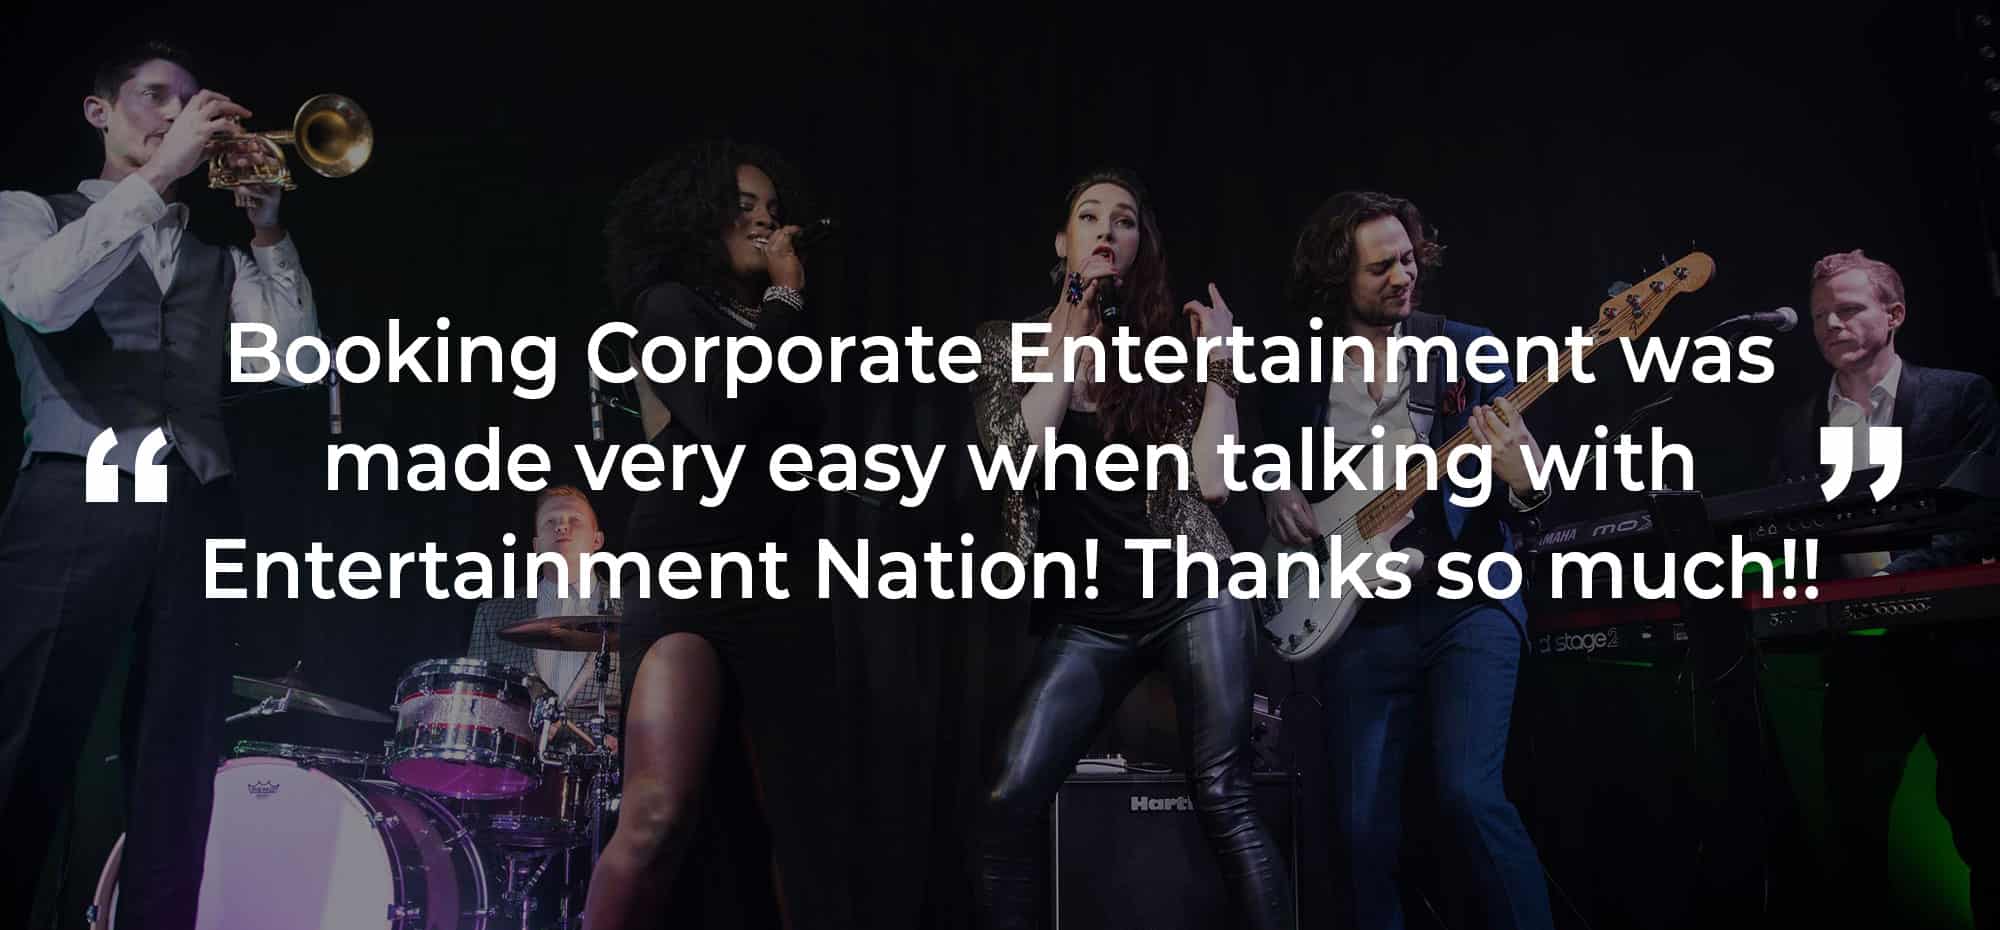 Review of Corporate Entertainment Norwich